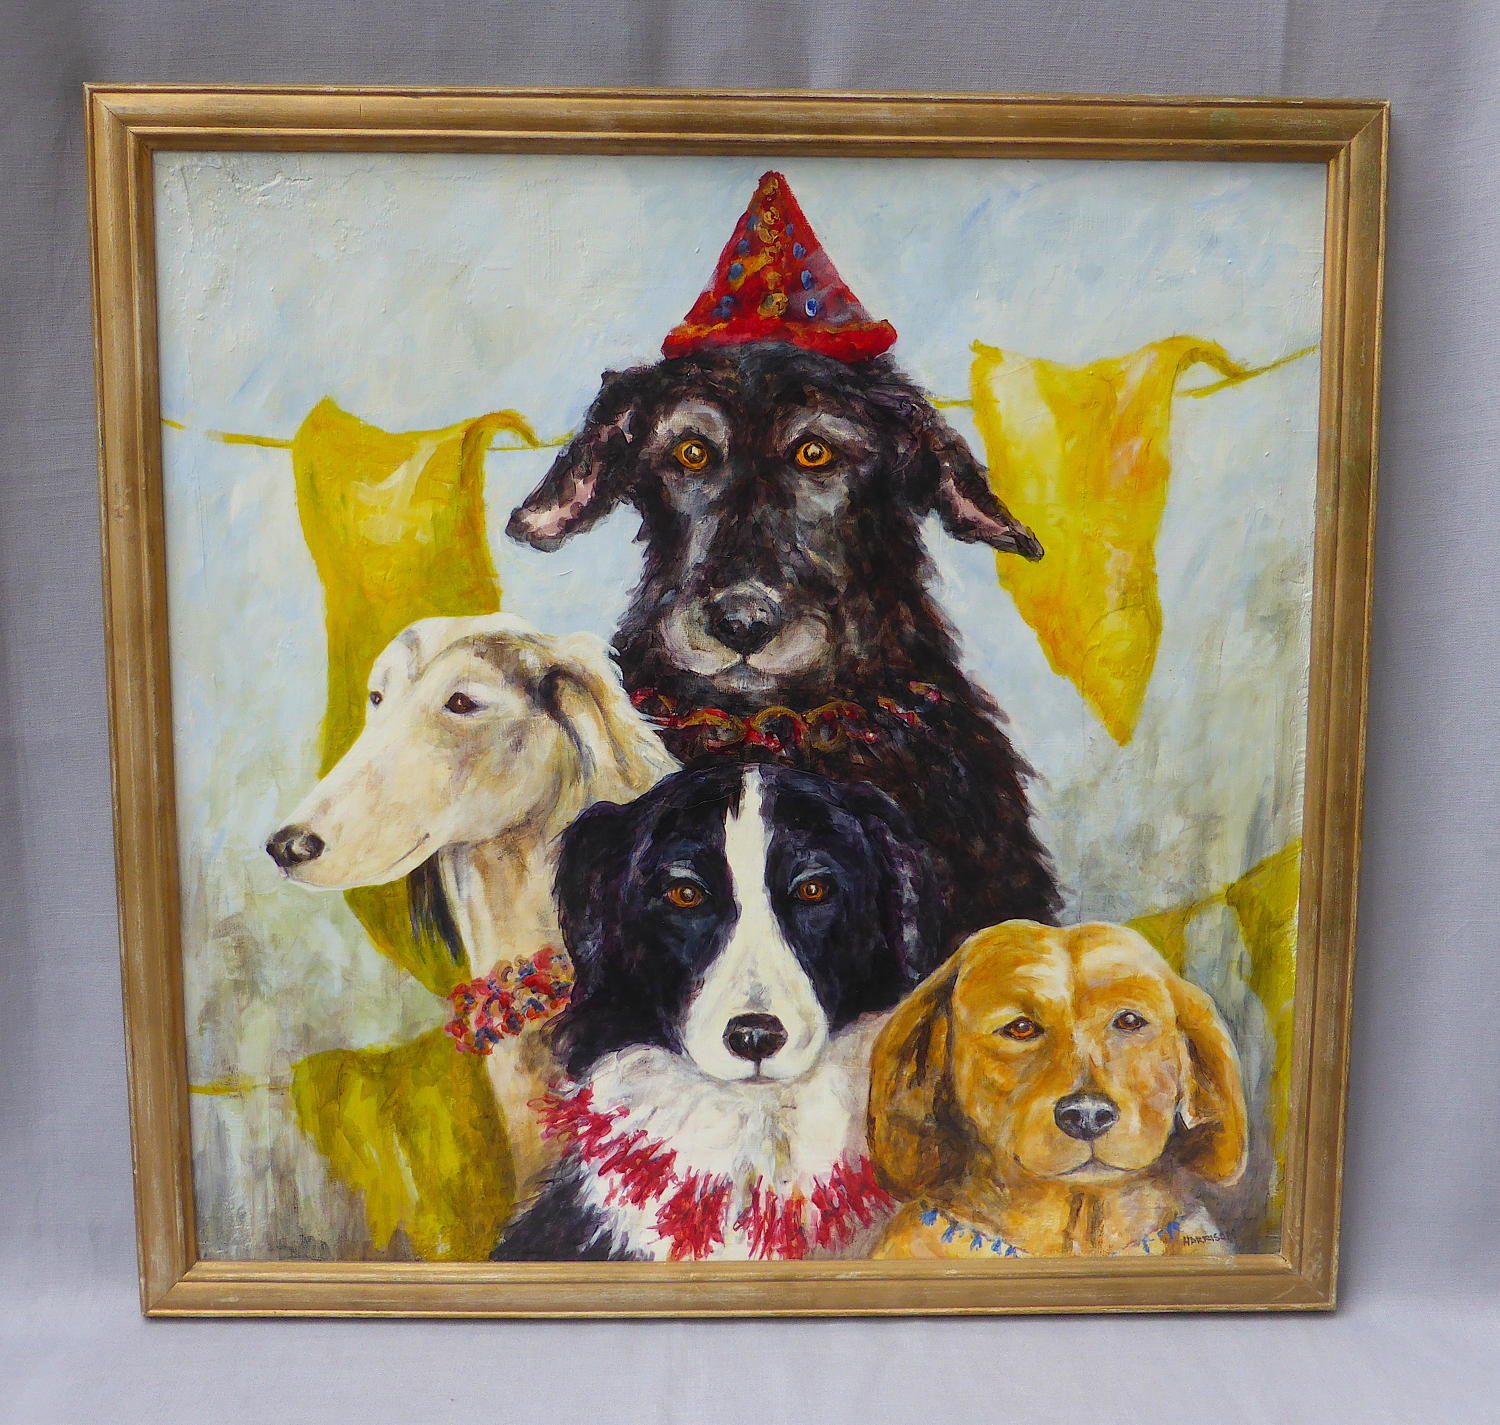 Framed party dogs collograph by Judith Harrison